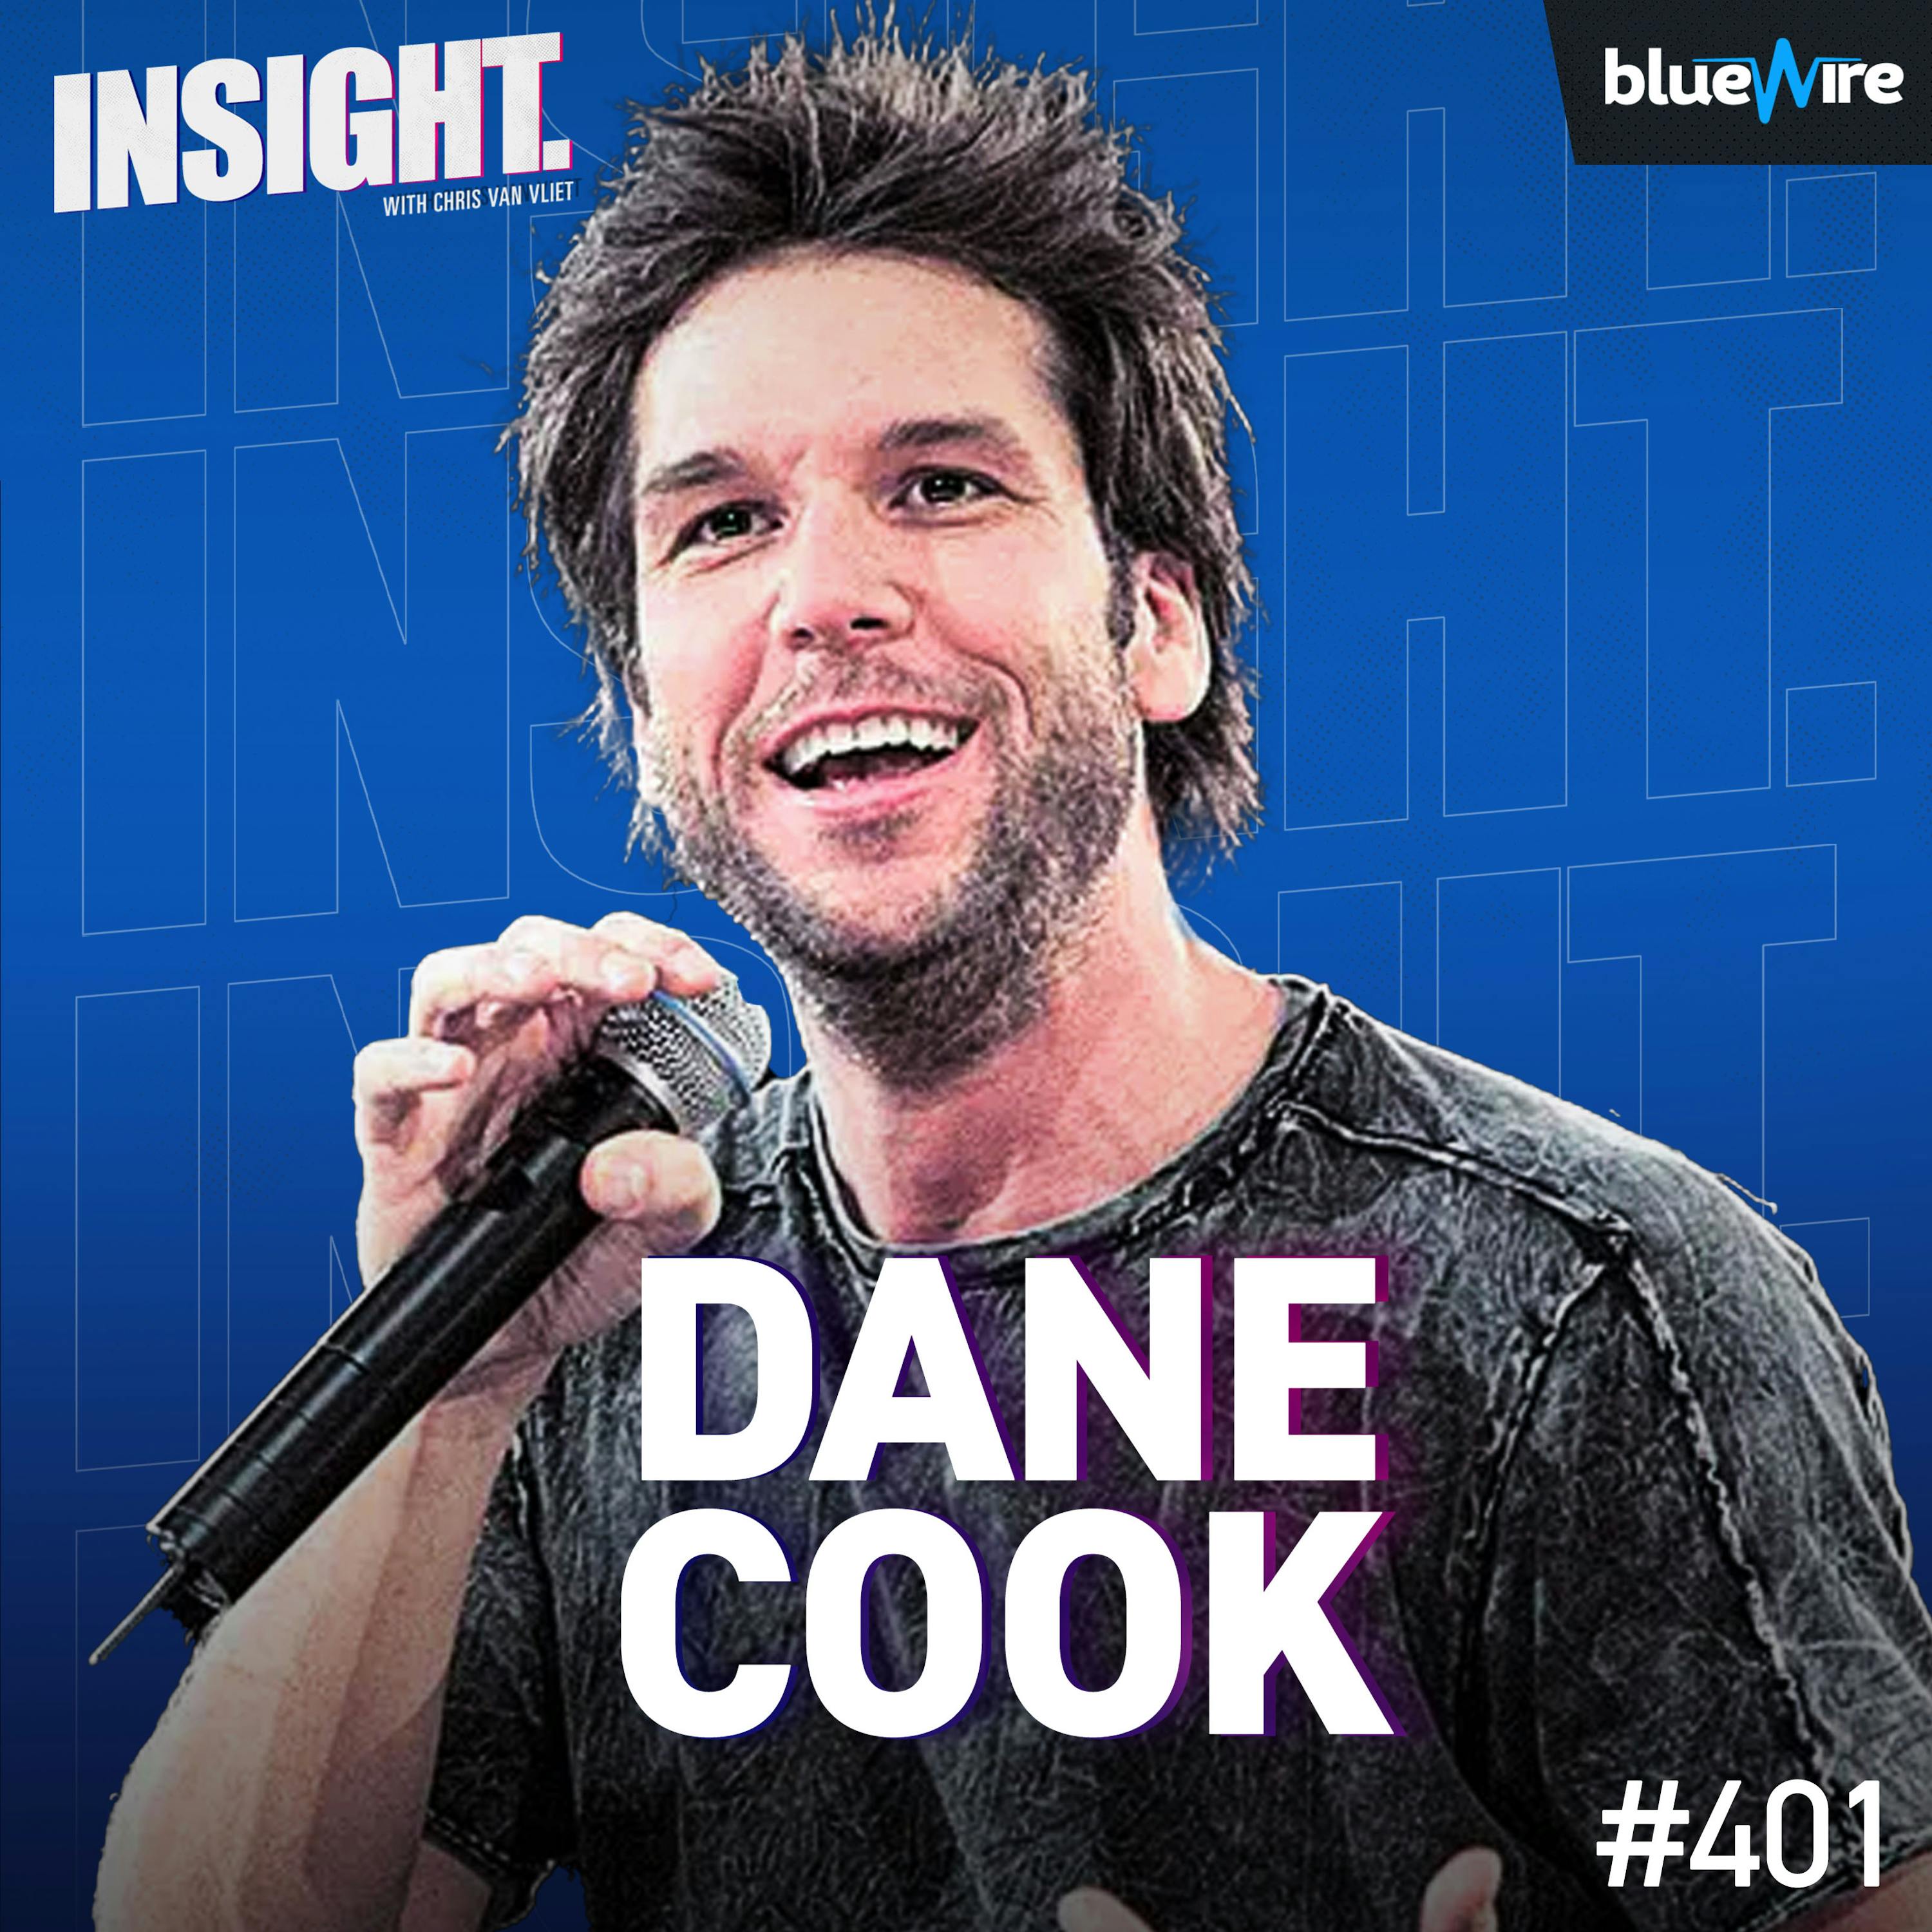 Dane Cook On Dealing With Hate, Dave Chappelle, His New Special "Above It All"